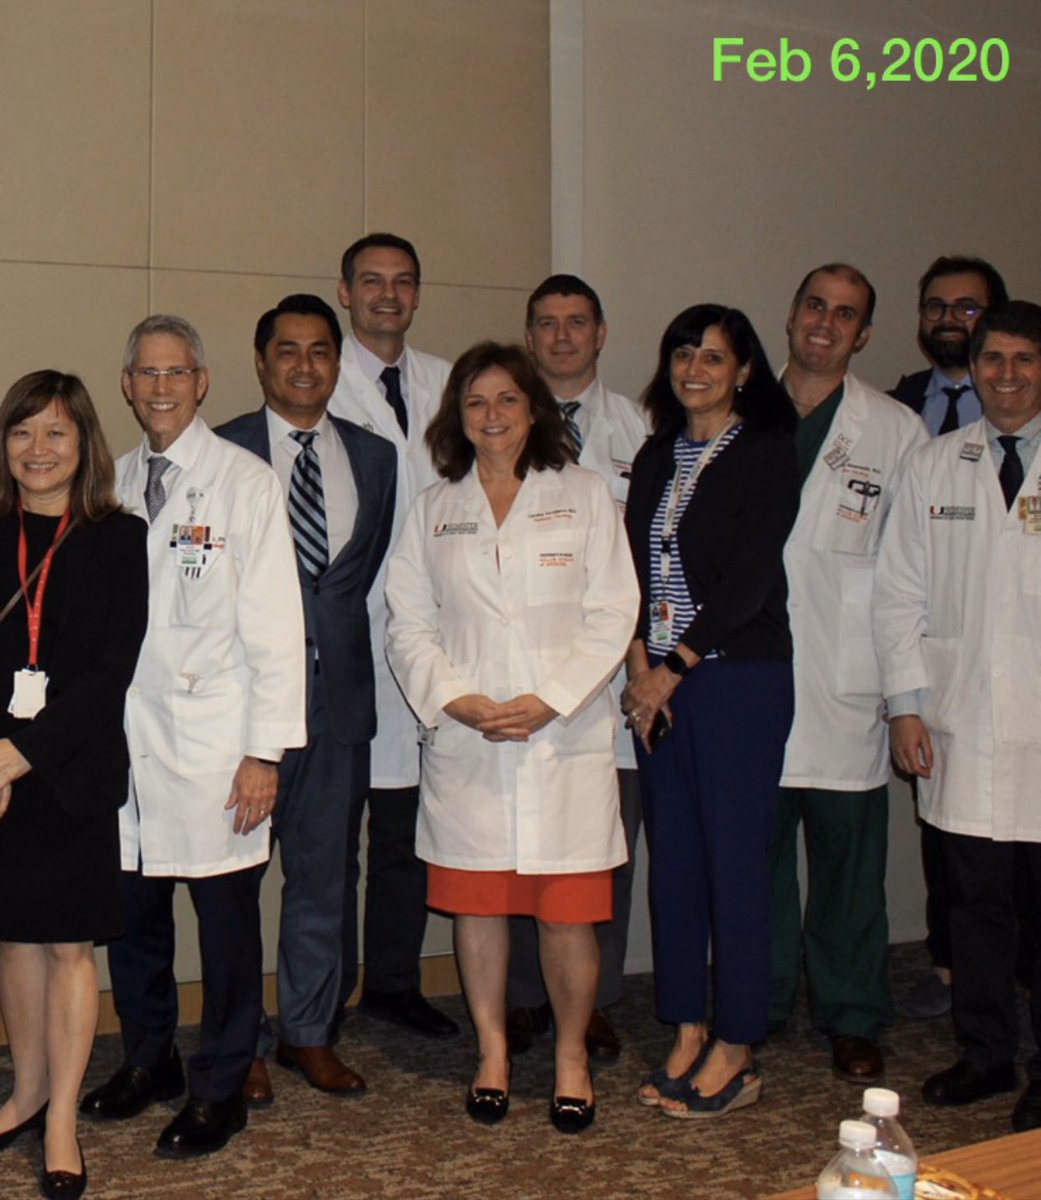 Back home today, after a superb and memorable experience at the @UMiamiRadOnc!!Truly thankful to the Miami Faculty @_APollack @a_dalpra @c_abramowitz  @ctakita1 @radistoyan @raphaelyechieli @EricMellon 
and to @umbertoricardi for this incredible opportunity!